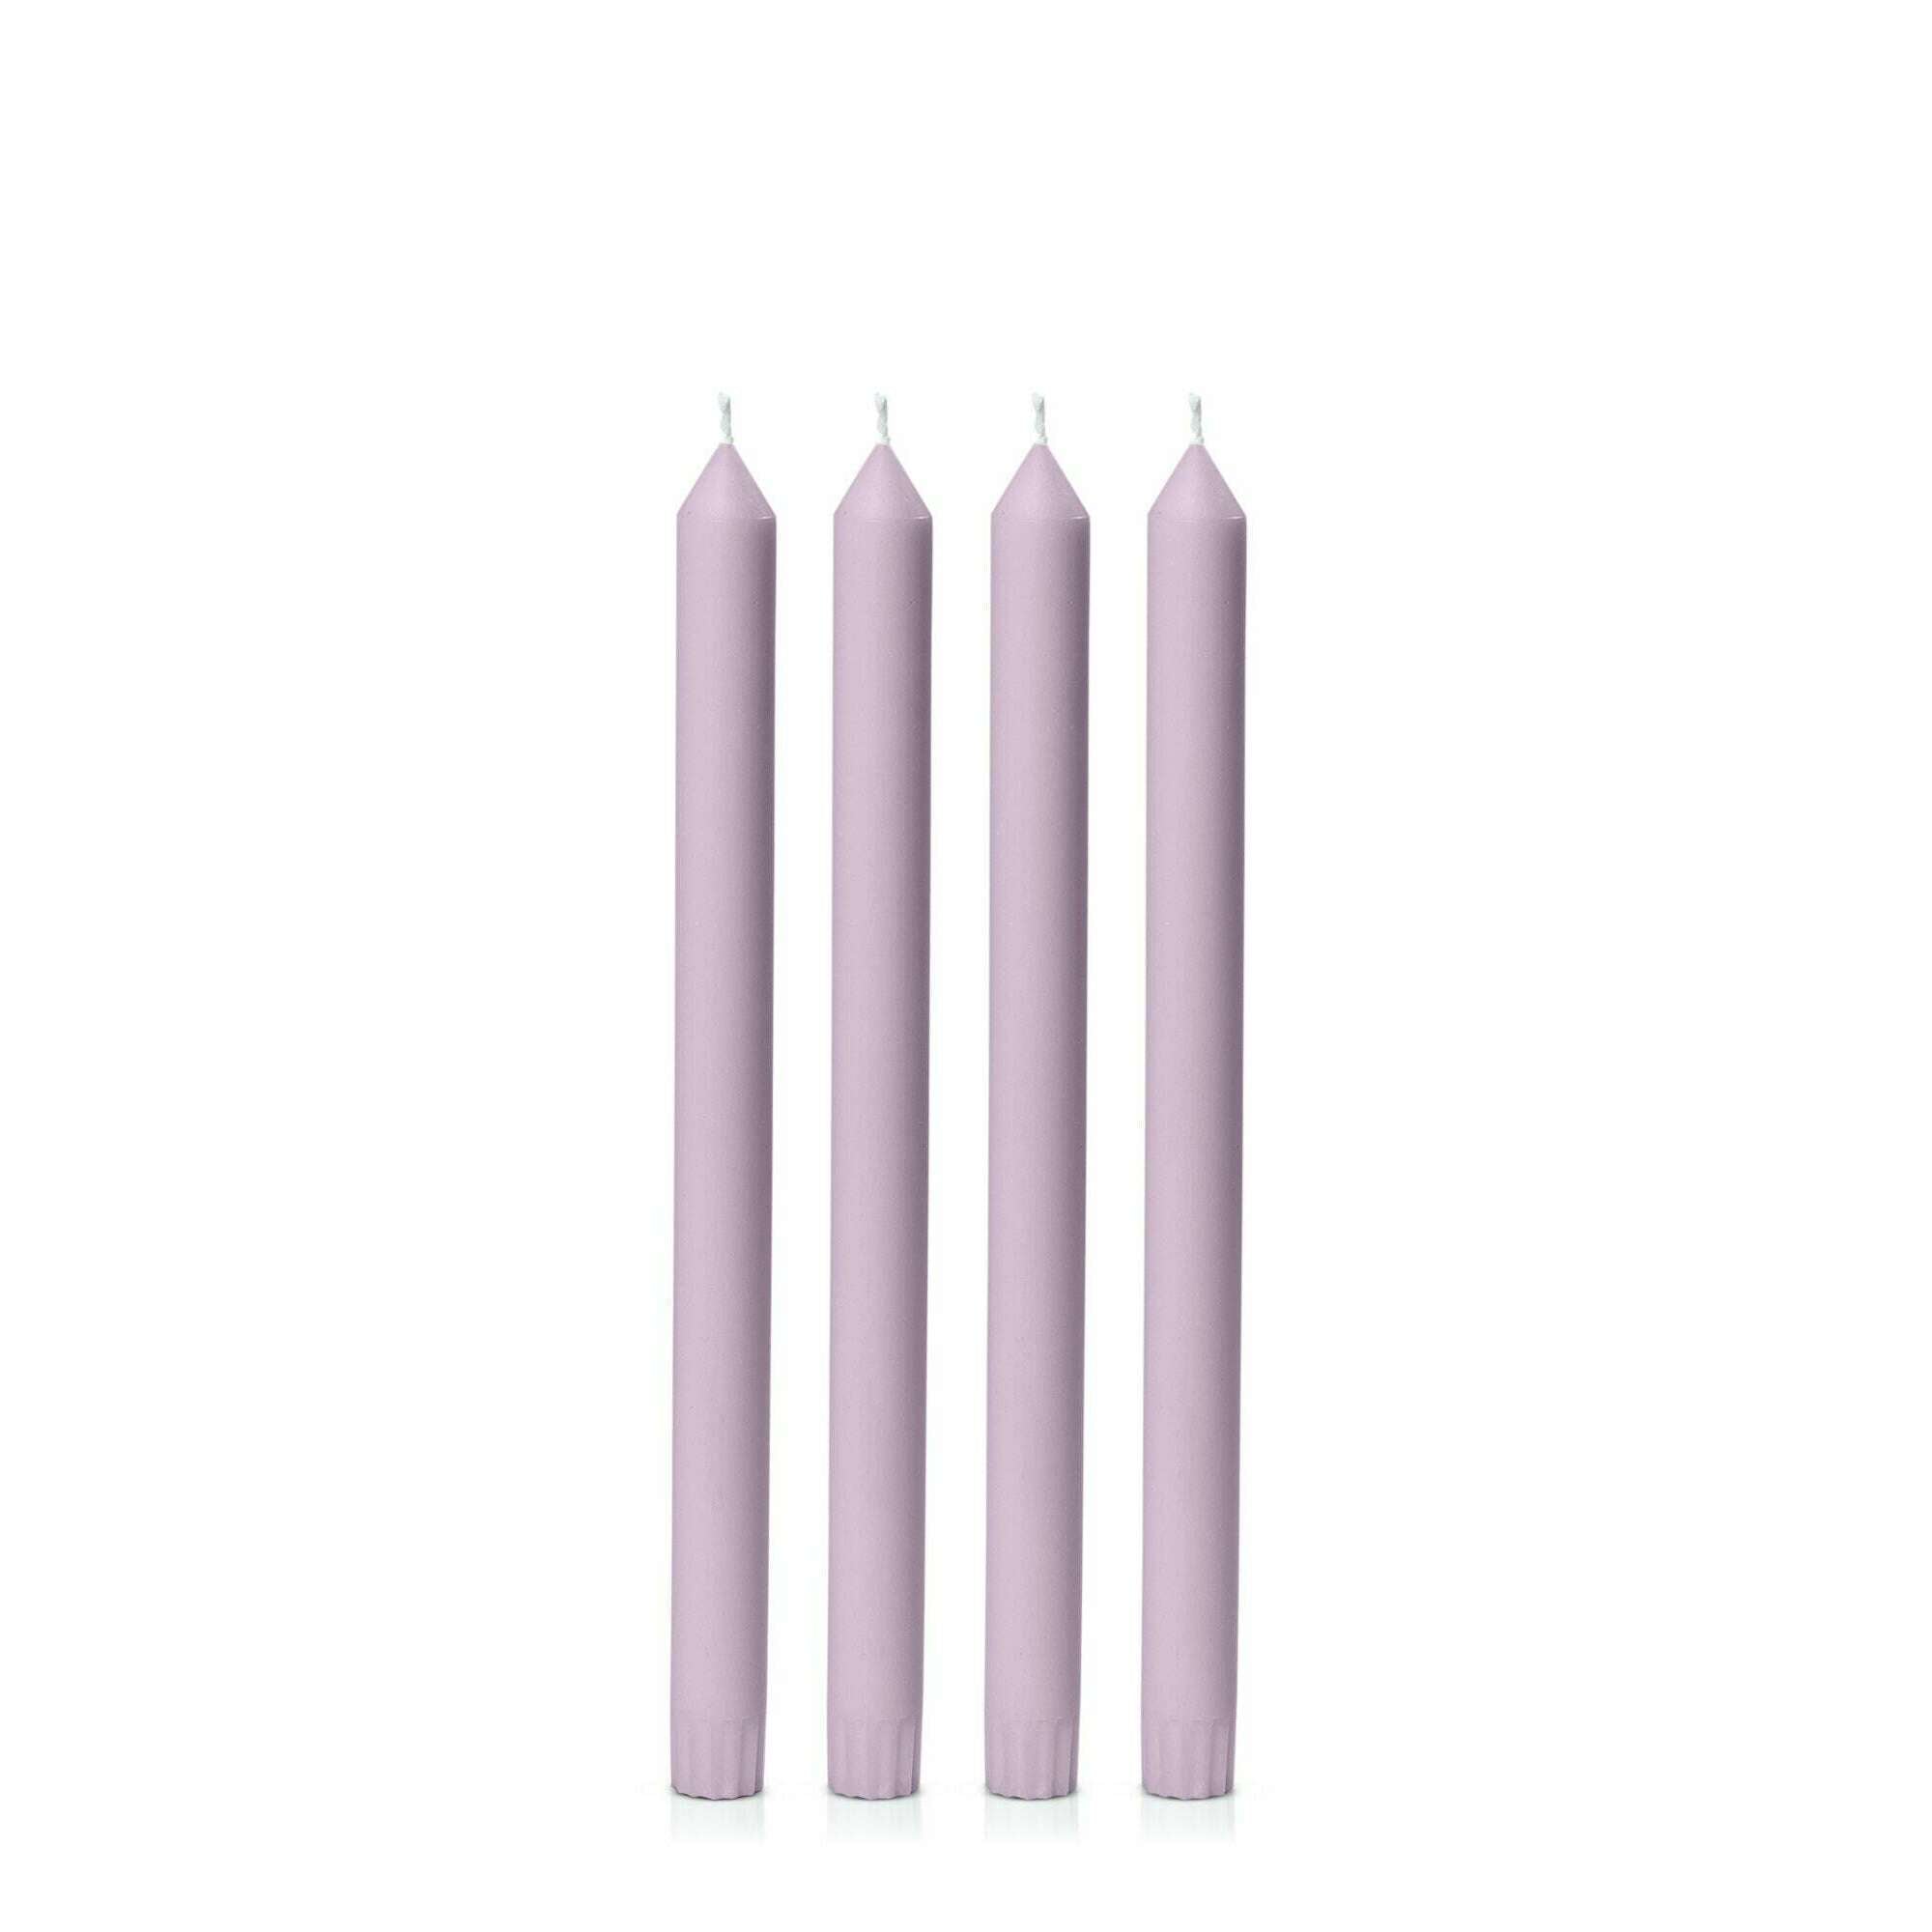 Impodimo Living & Giving:Moreton Eco Dinner Candle - Lilac:Candle Co